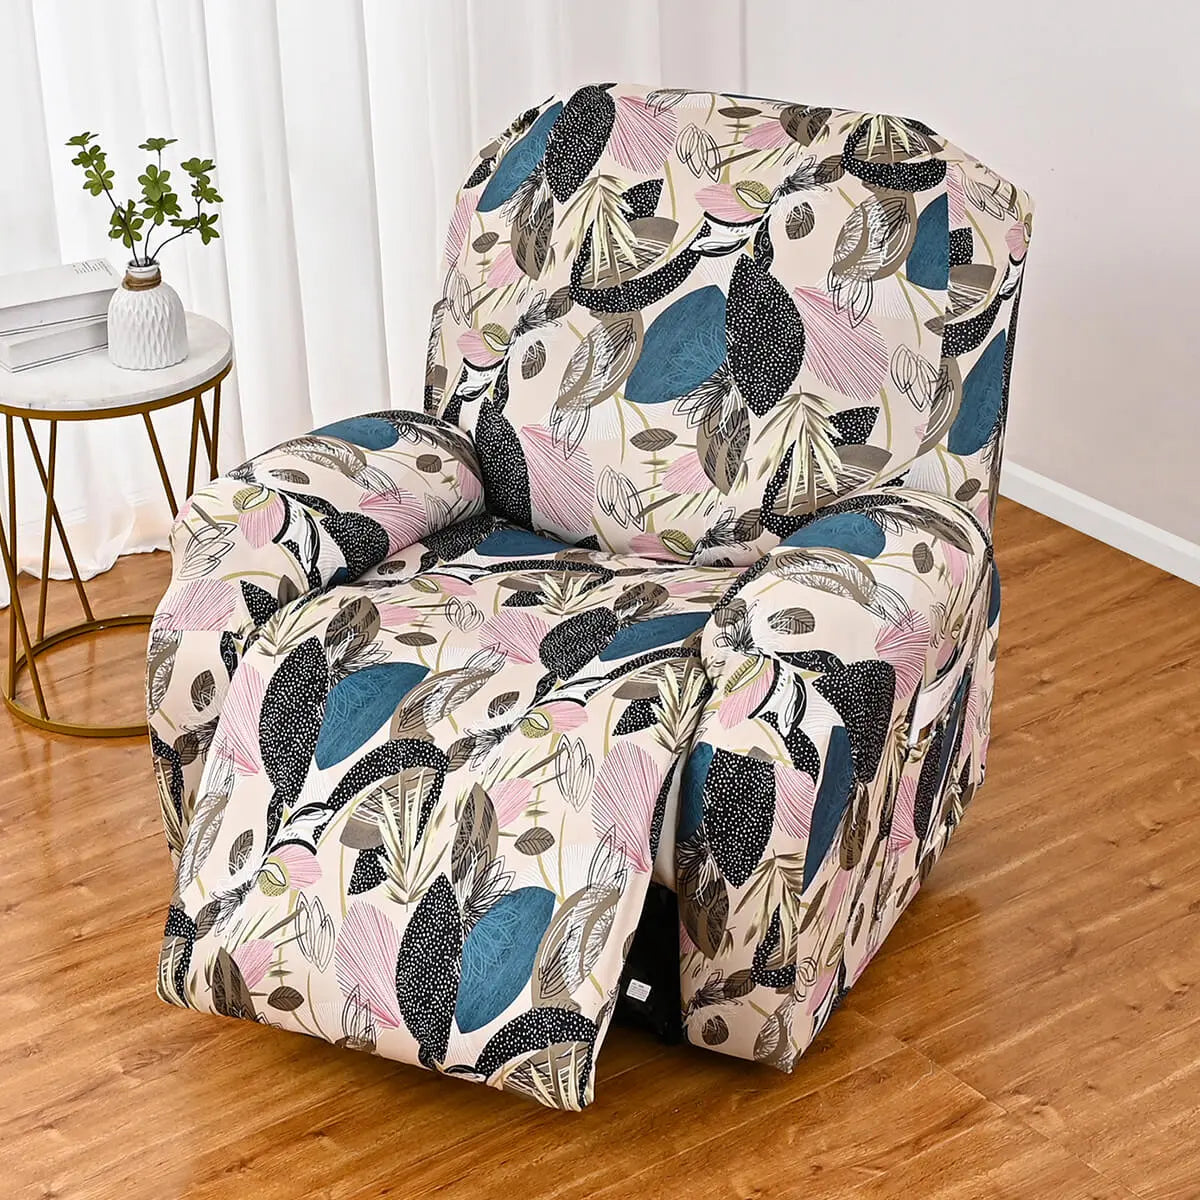 Stretch Printed Sofa Cover 4-Piece Lazy Boy Chair Covers Crfatop %sku%